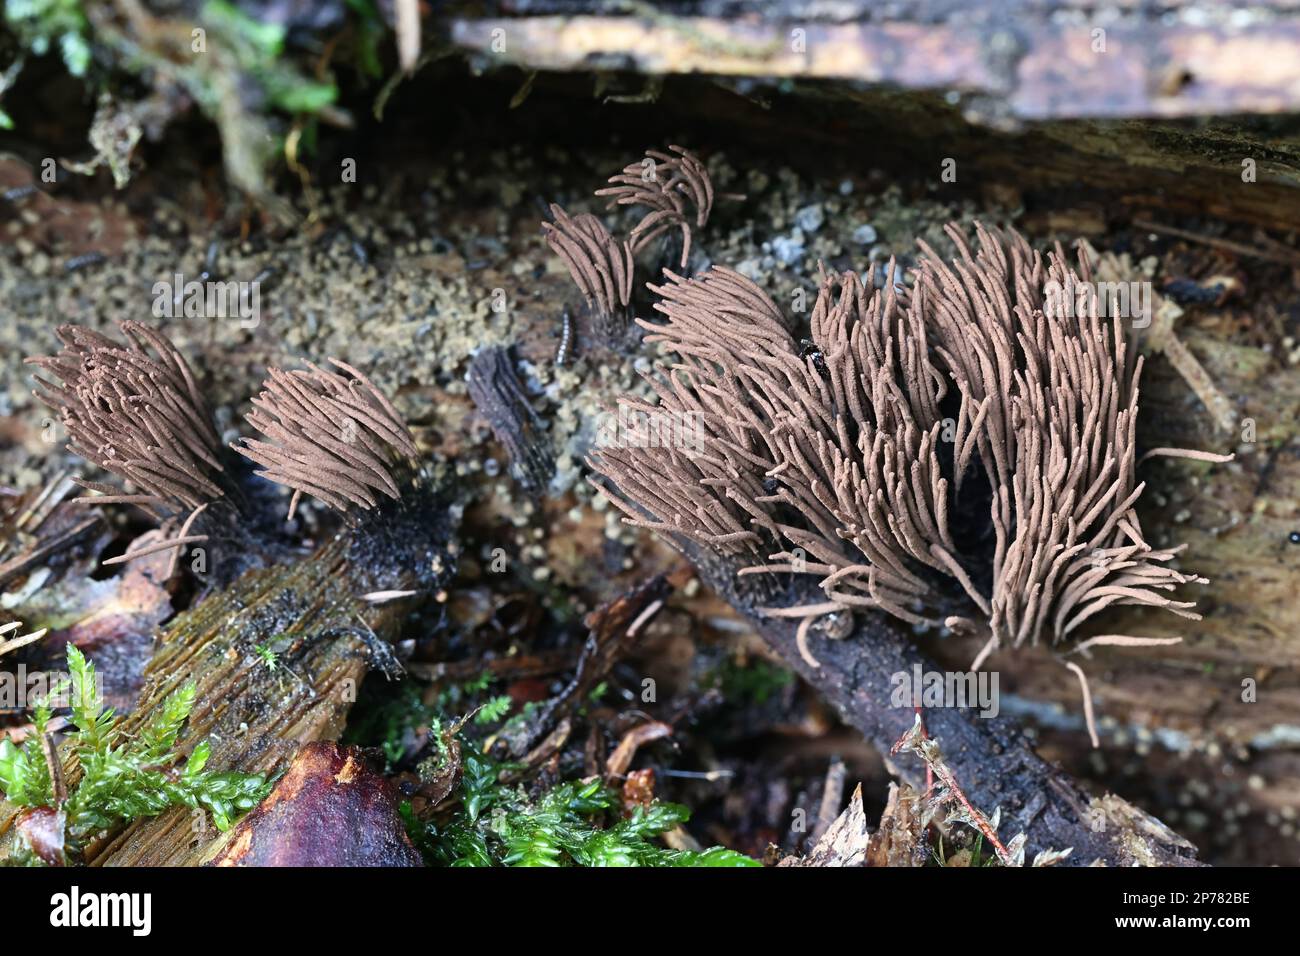 Stemonitis axifera, known as the chocolate tube slime mold, myxomycete from Finland Stock Photo